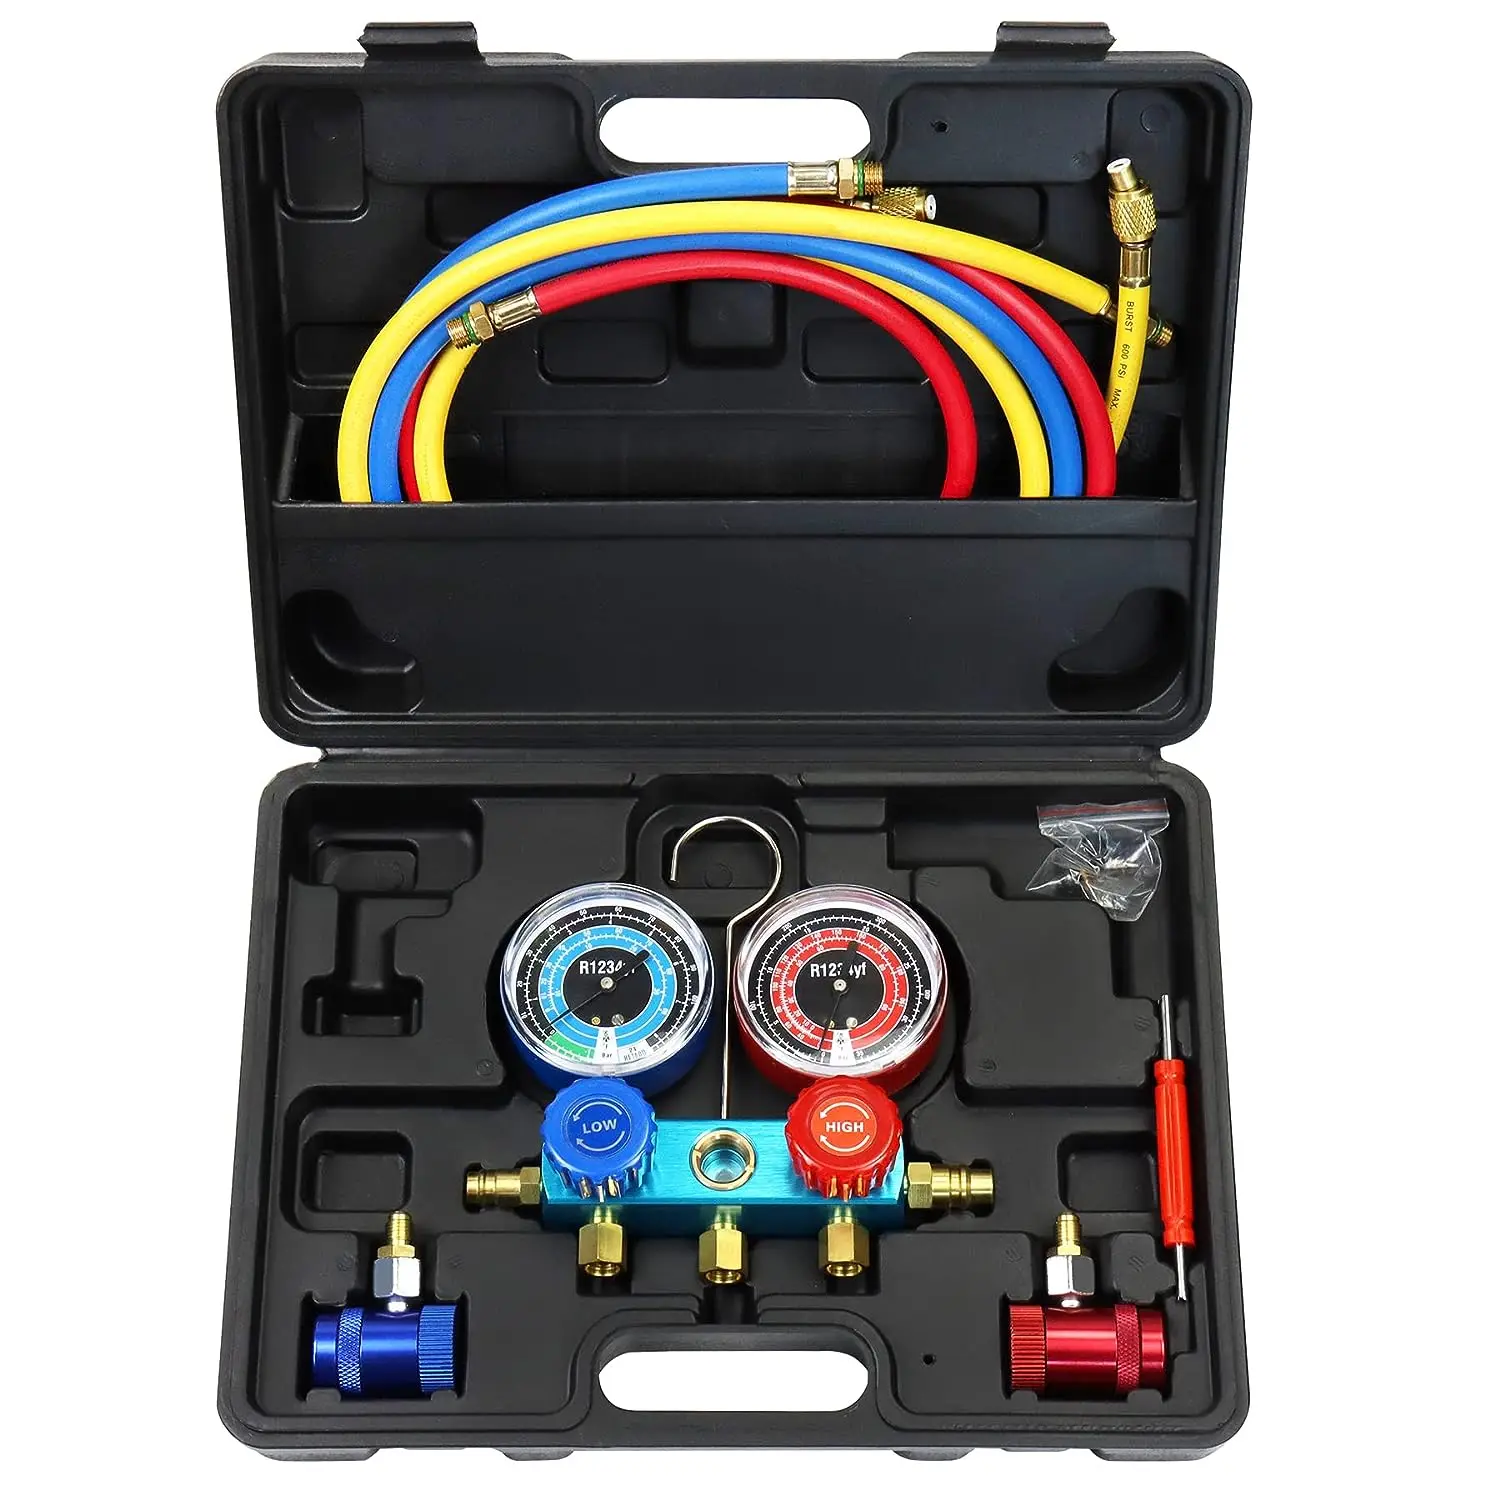 R1234yf Manifold Gauge Set, 3 Way Car Air Conditioning 1234yf Refrigerant  Recharge Tool Kit, with Hoses Quick Coupler Case, for - AliExpress